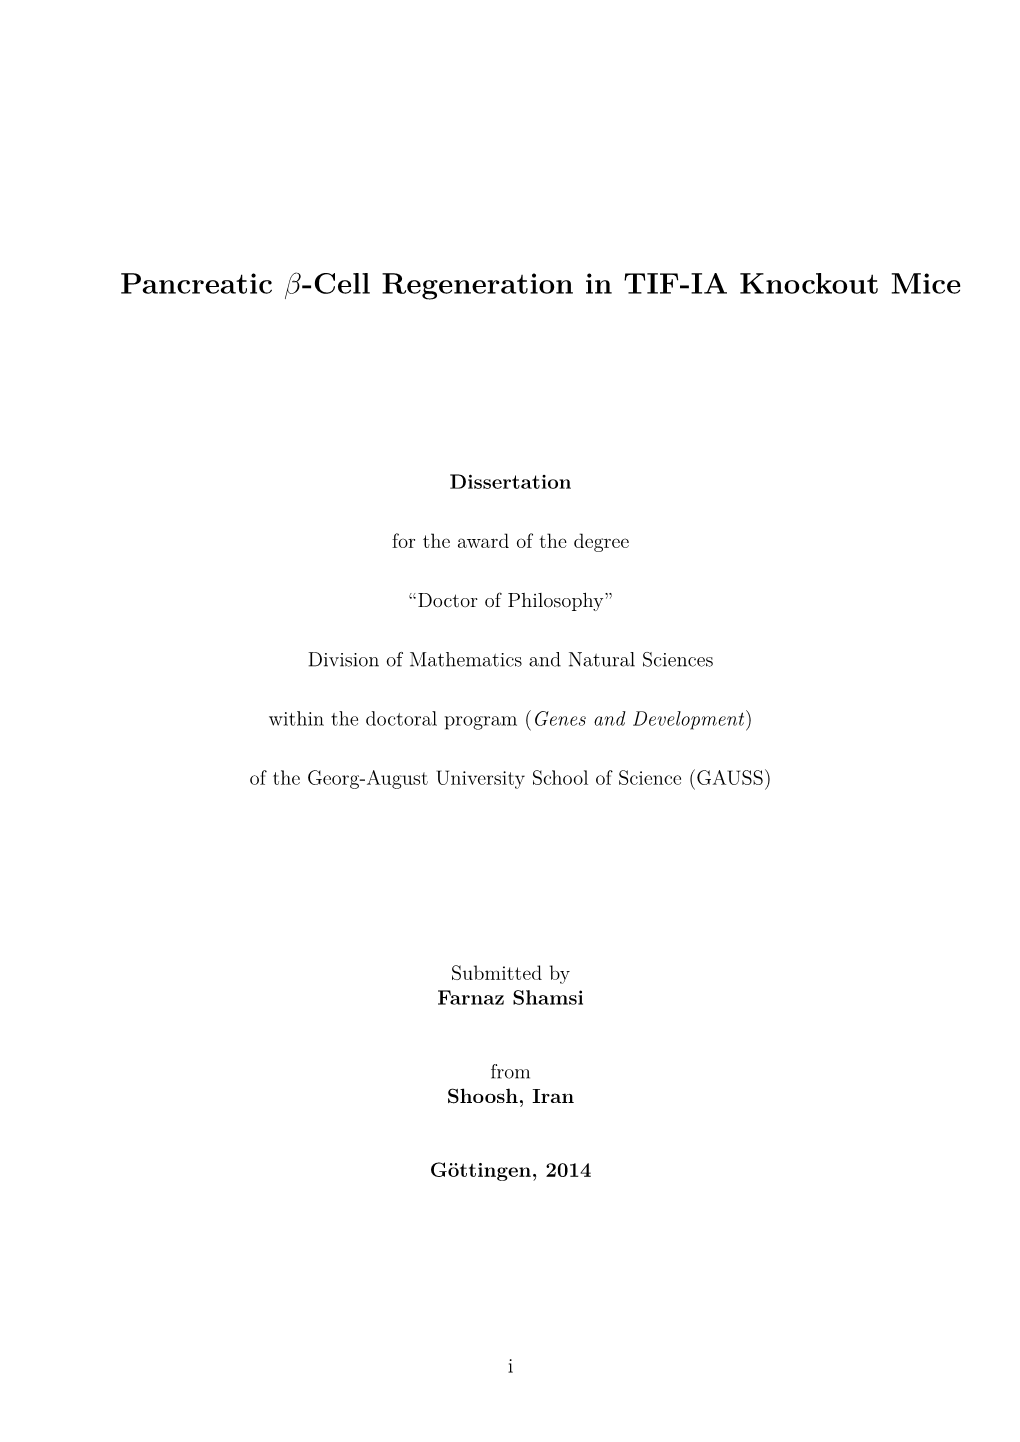 Pancreatic Β-Cell Regeneration in TIF-IA Knockout Mice